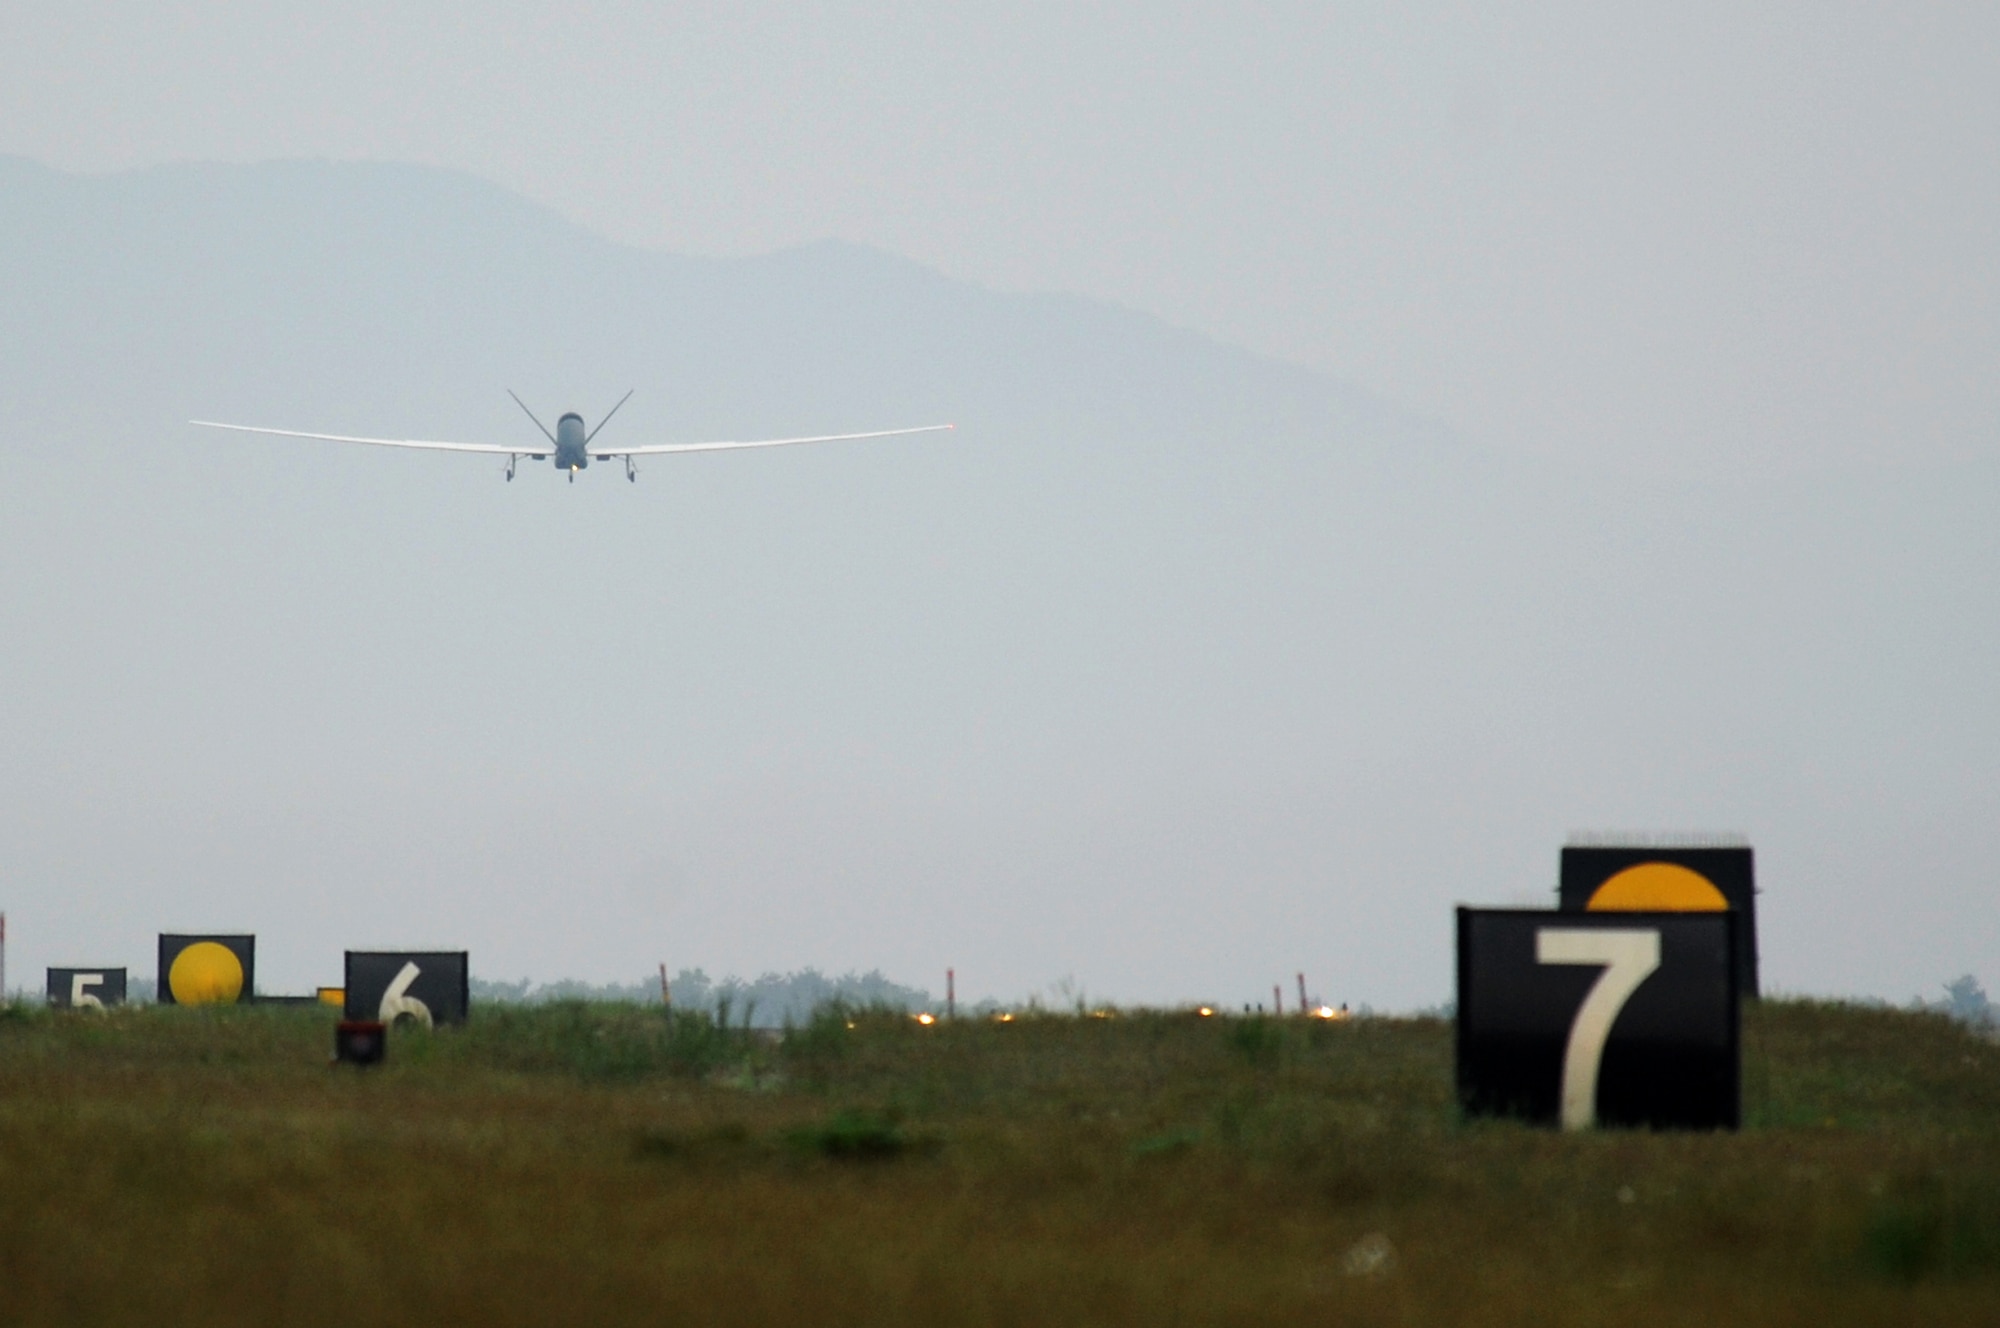 The RQ-4 Global Hawk approaches Misawa Air Base marking the first historic landing in Japanese territory, May 24, 2014. The remotely piloted system is temporarily assigned here from Andersen AFB, Guam, during the months of May through October. (U.S. Air Force photo/Tech. Sgt. April Quintanilla)